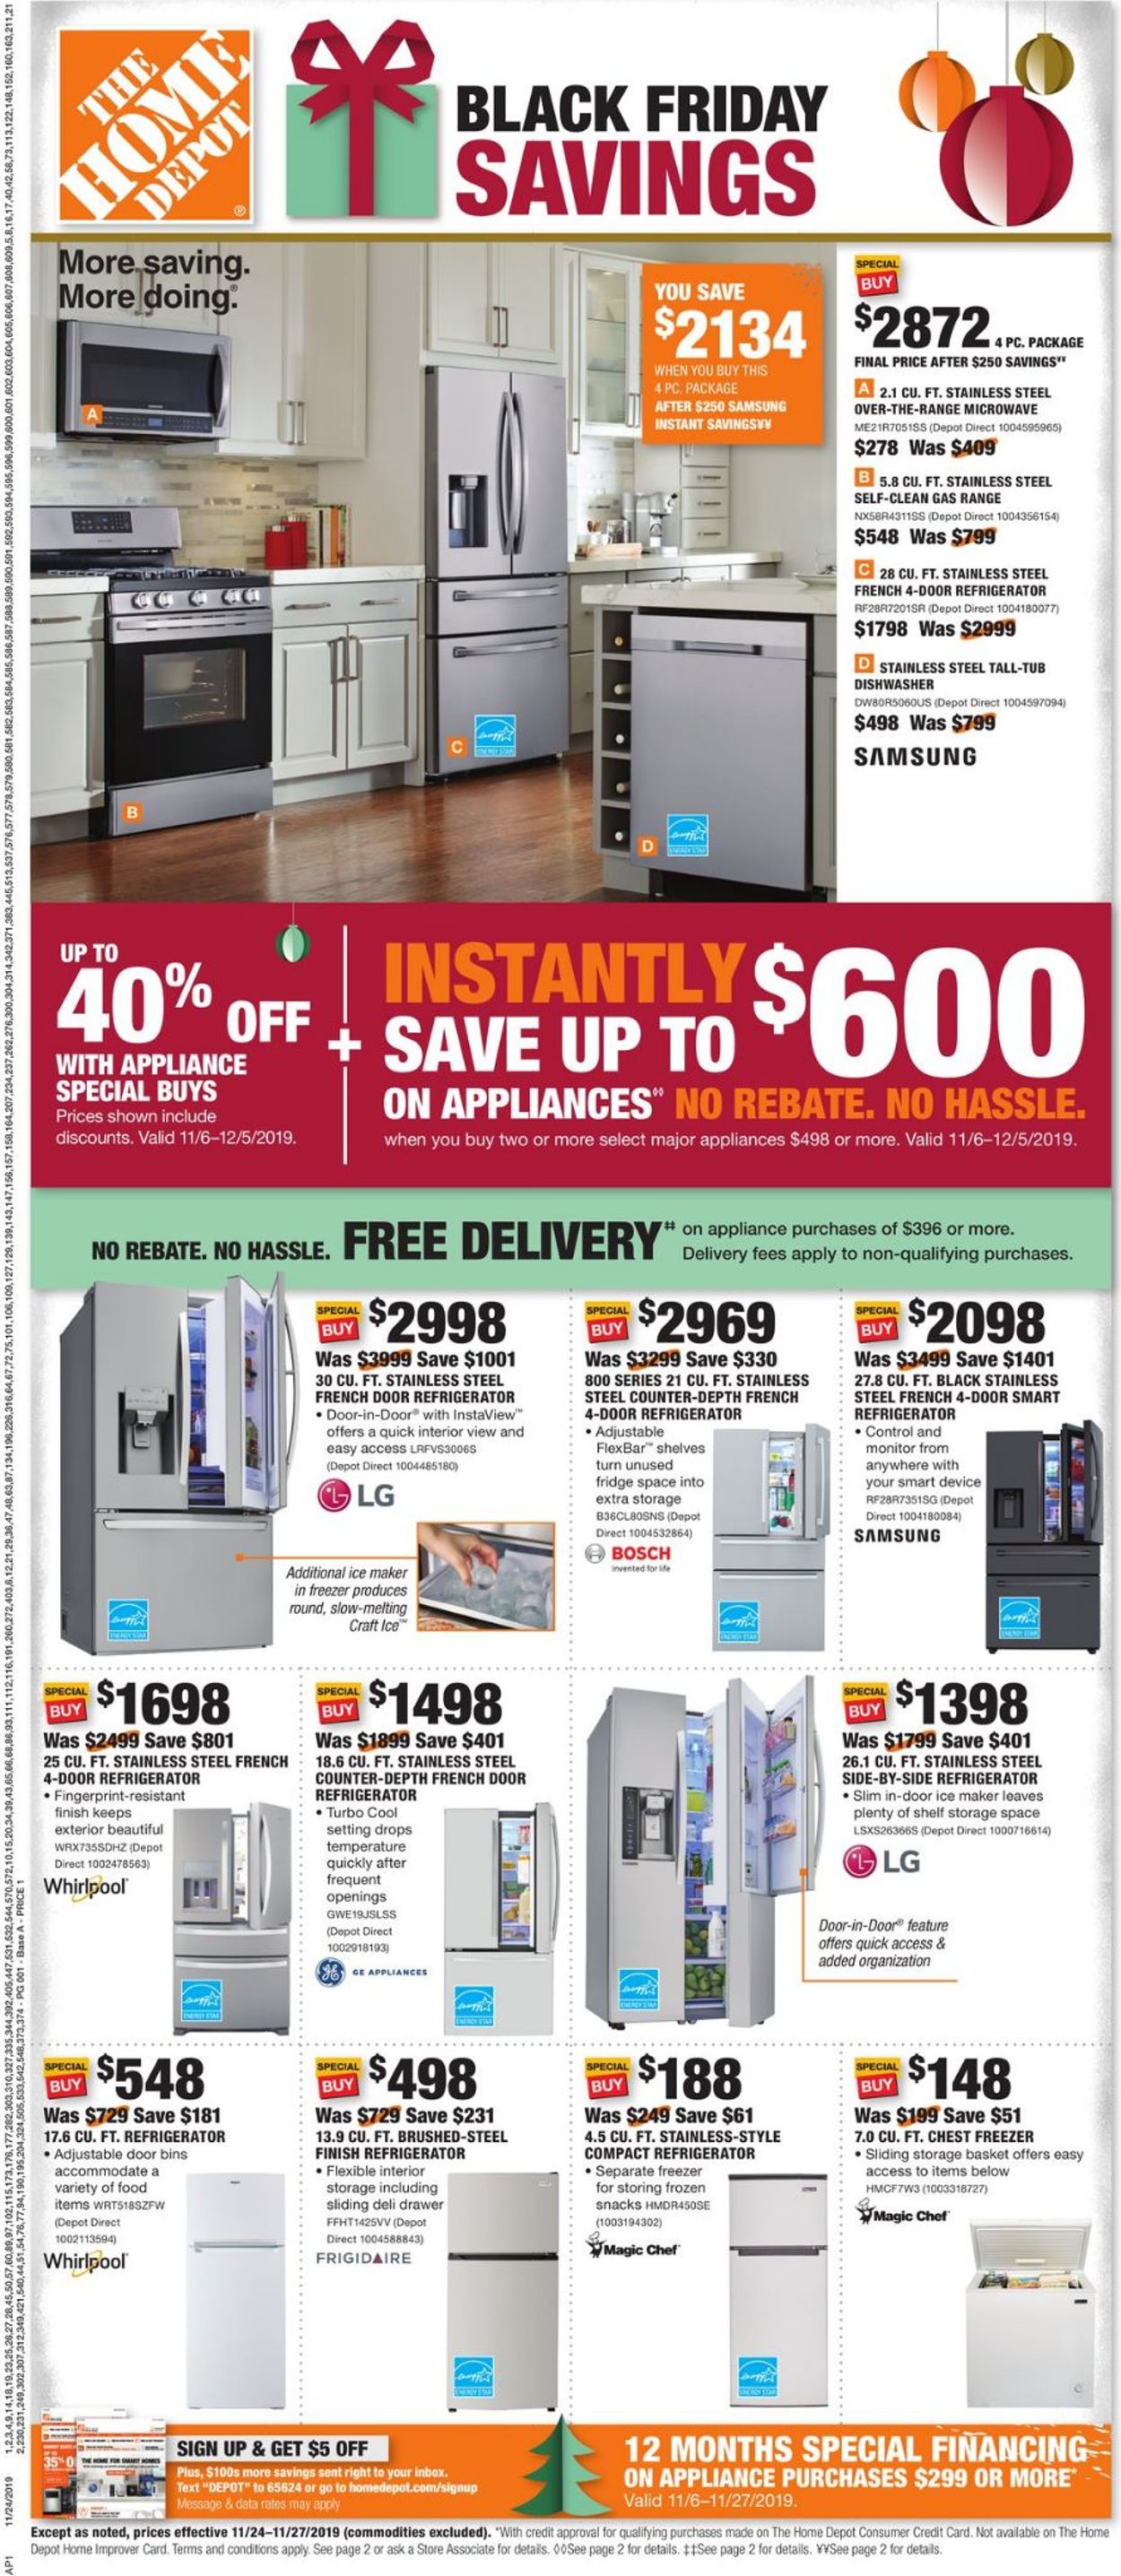 Home Depot - Black Friday Ad 2019 Current weekly ad 11/24 - 11/27/2019 - www.waldenwongart.com